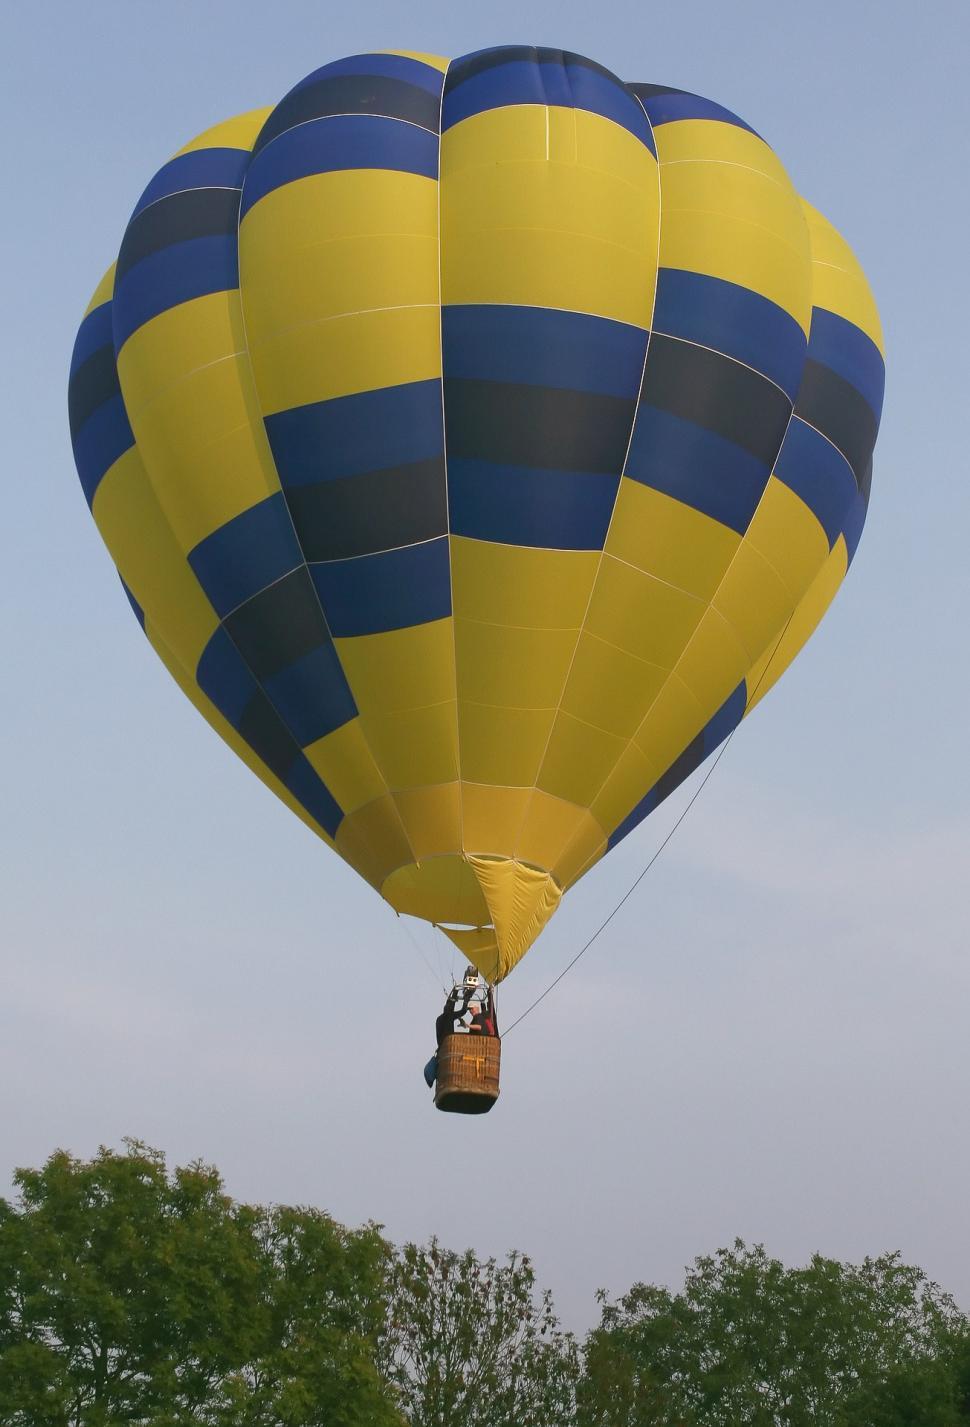 Free Image of Majestic Yellow and Blue Hot Air Balloon 